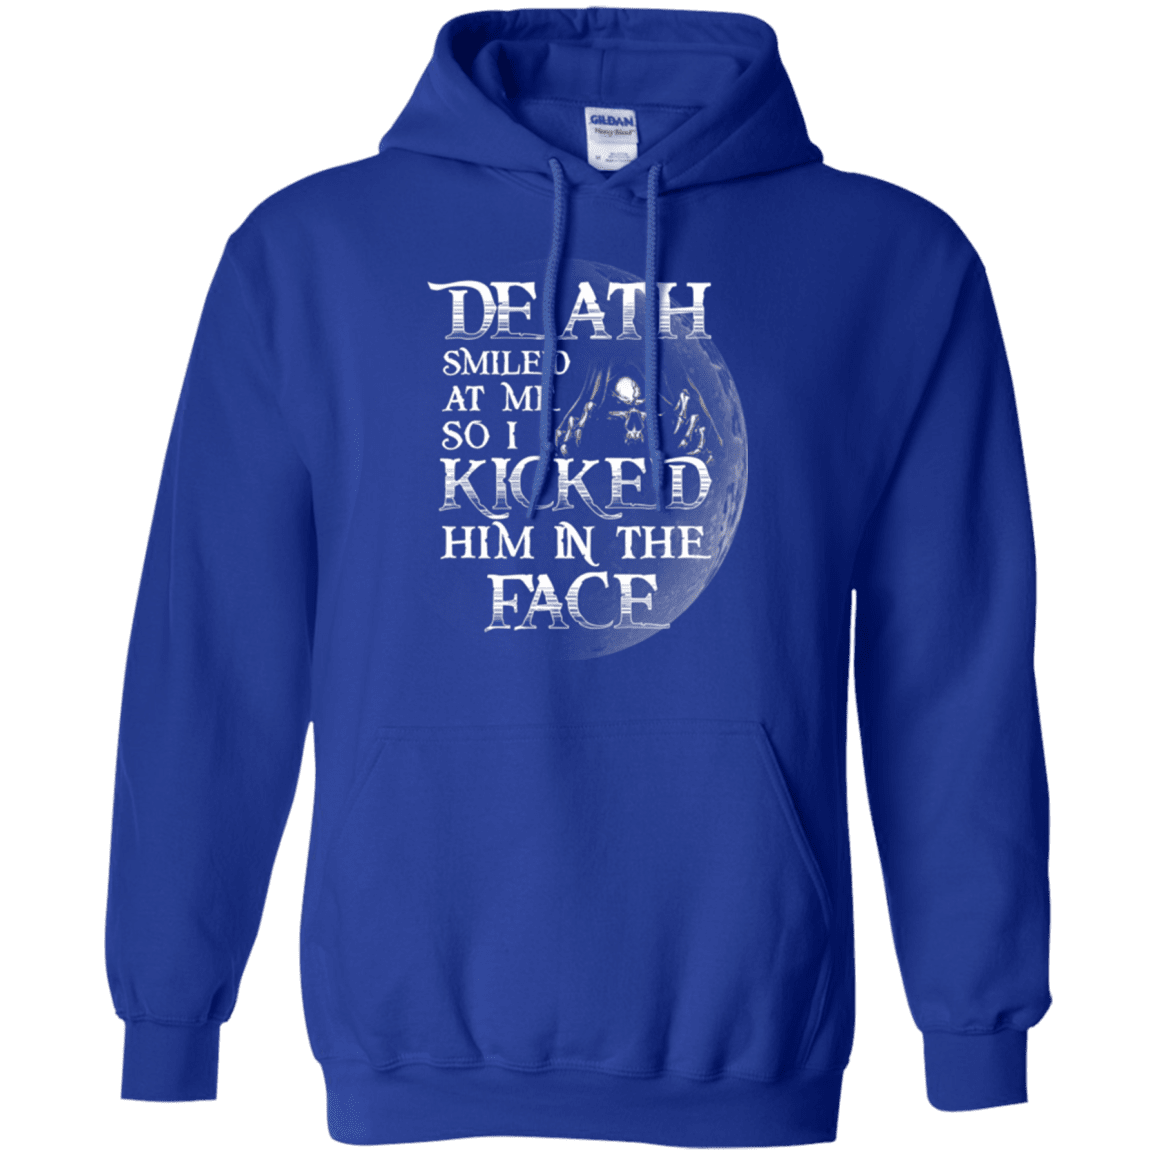 Military T-Shirt "Death Smiled At Me I Kicked Him In The Face"-TShirt-General-Veterans Nation